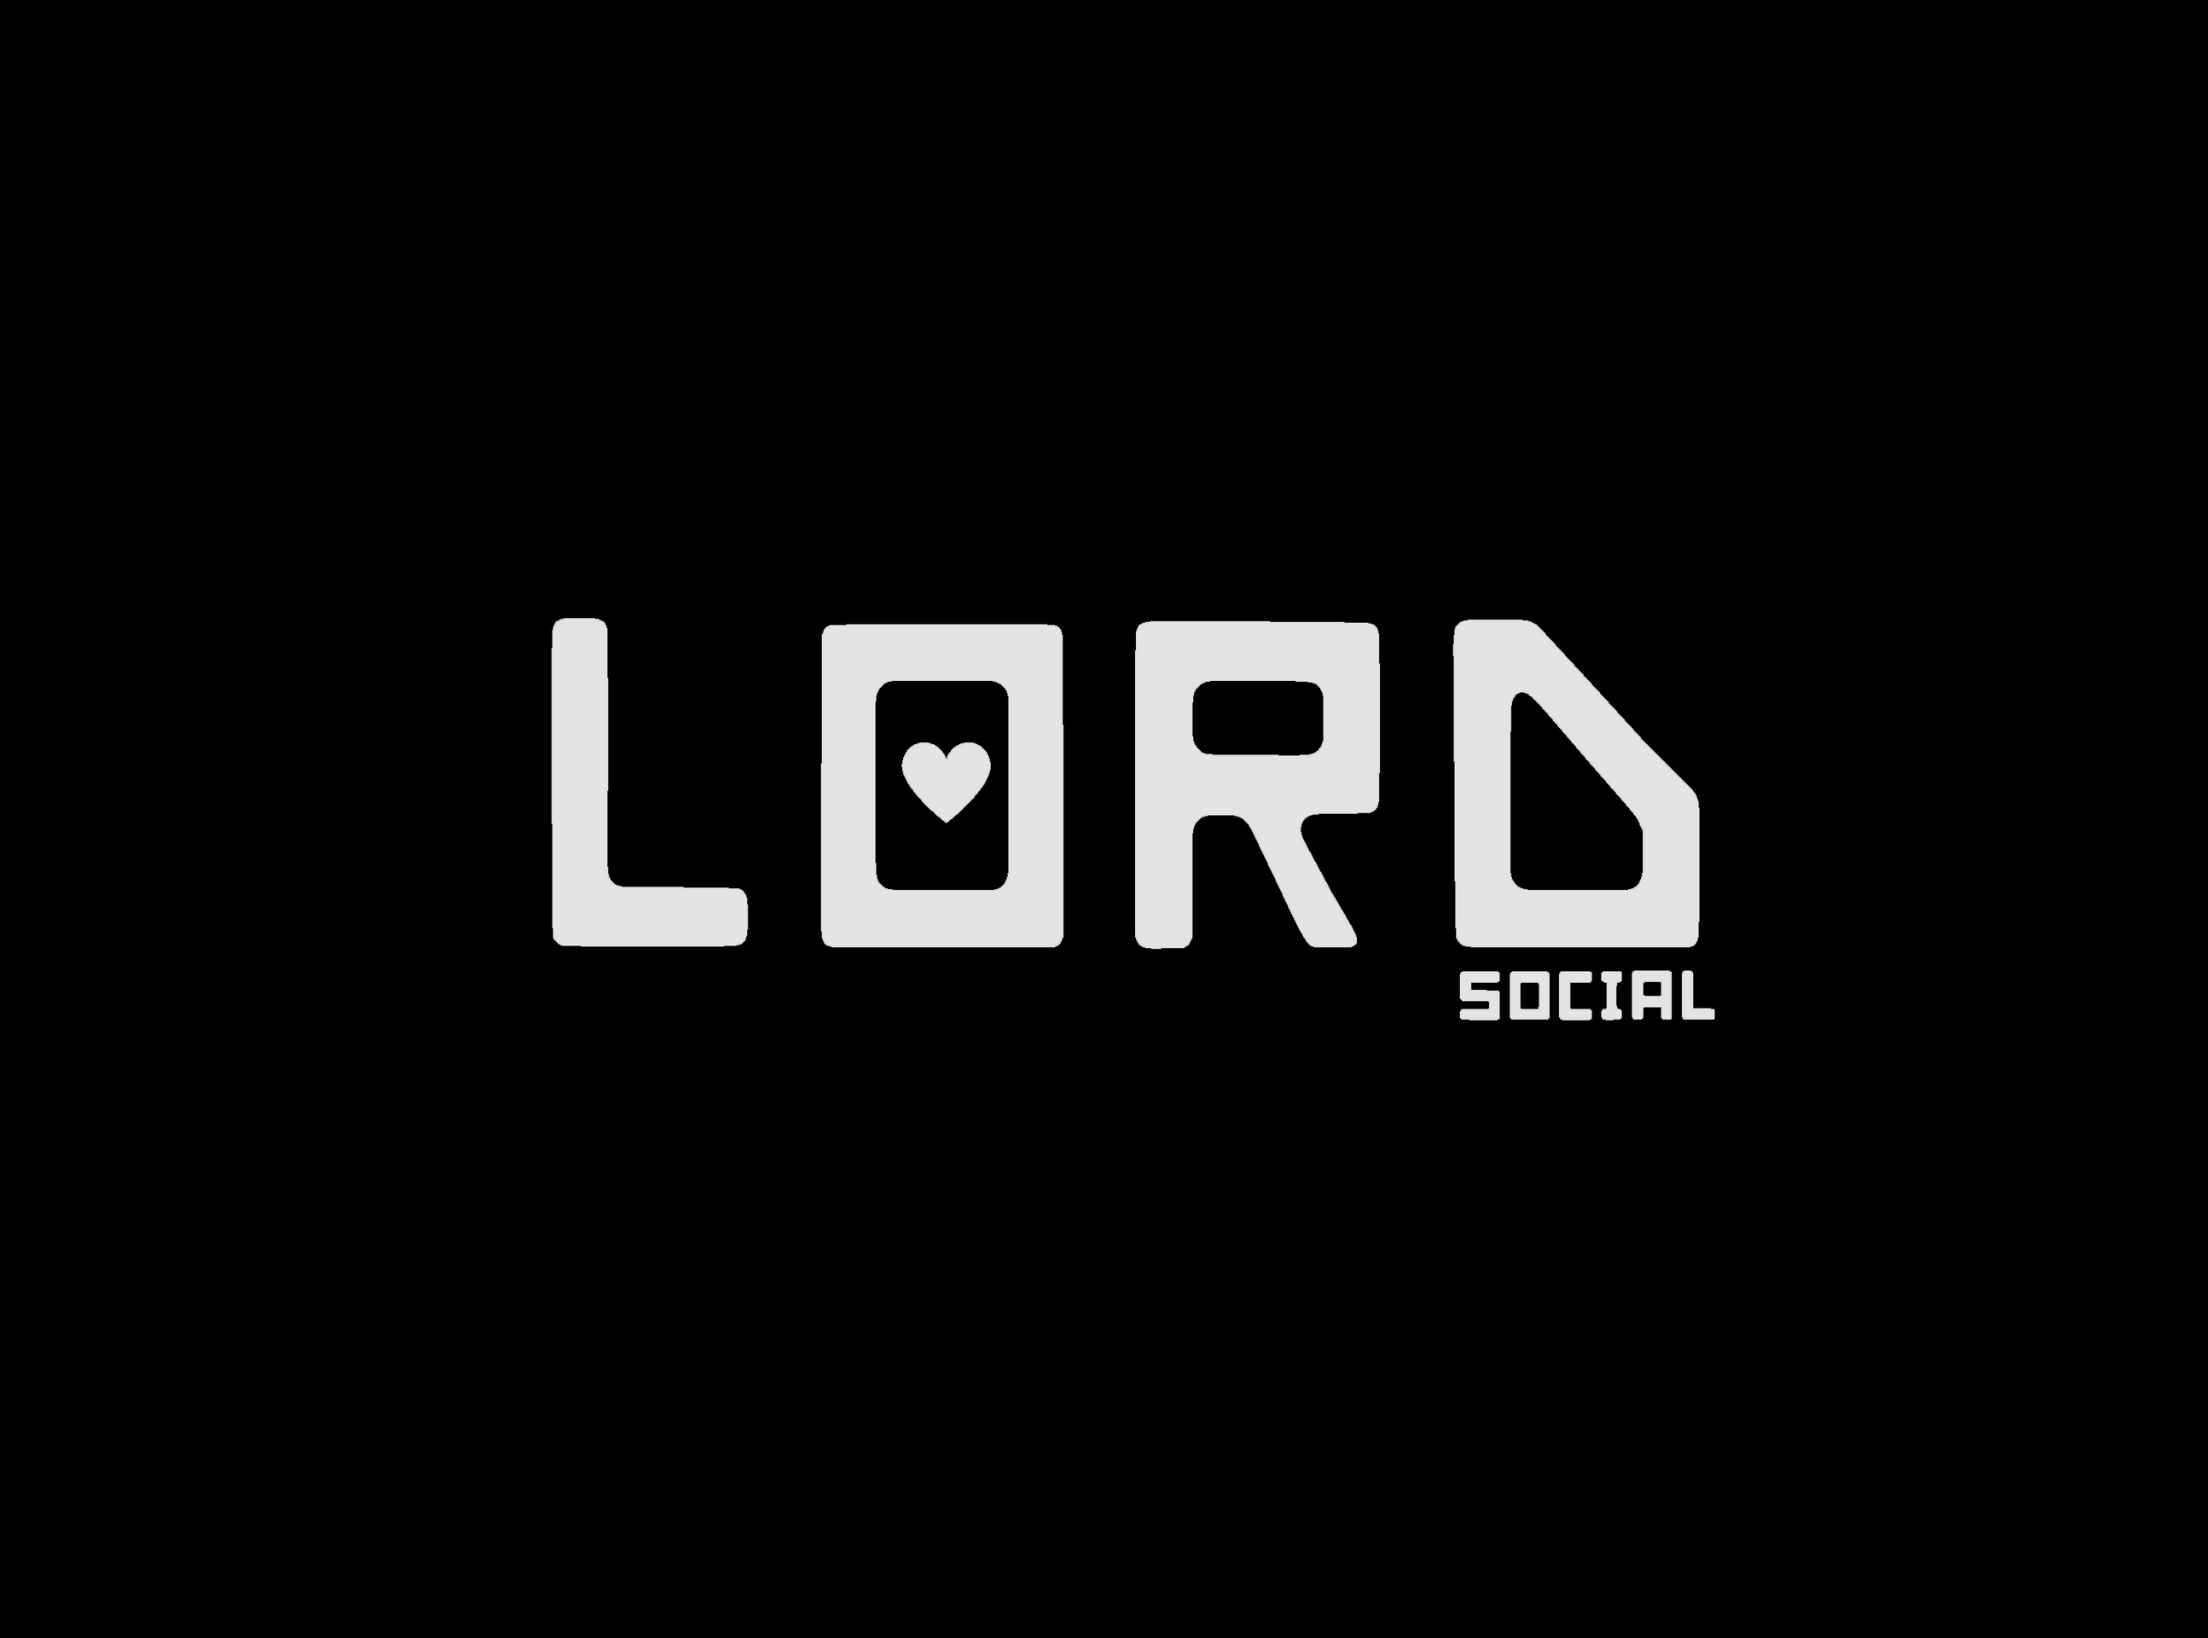 LordSocial profile on Qualified.One